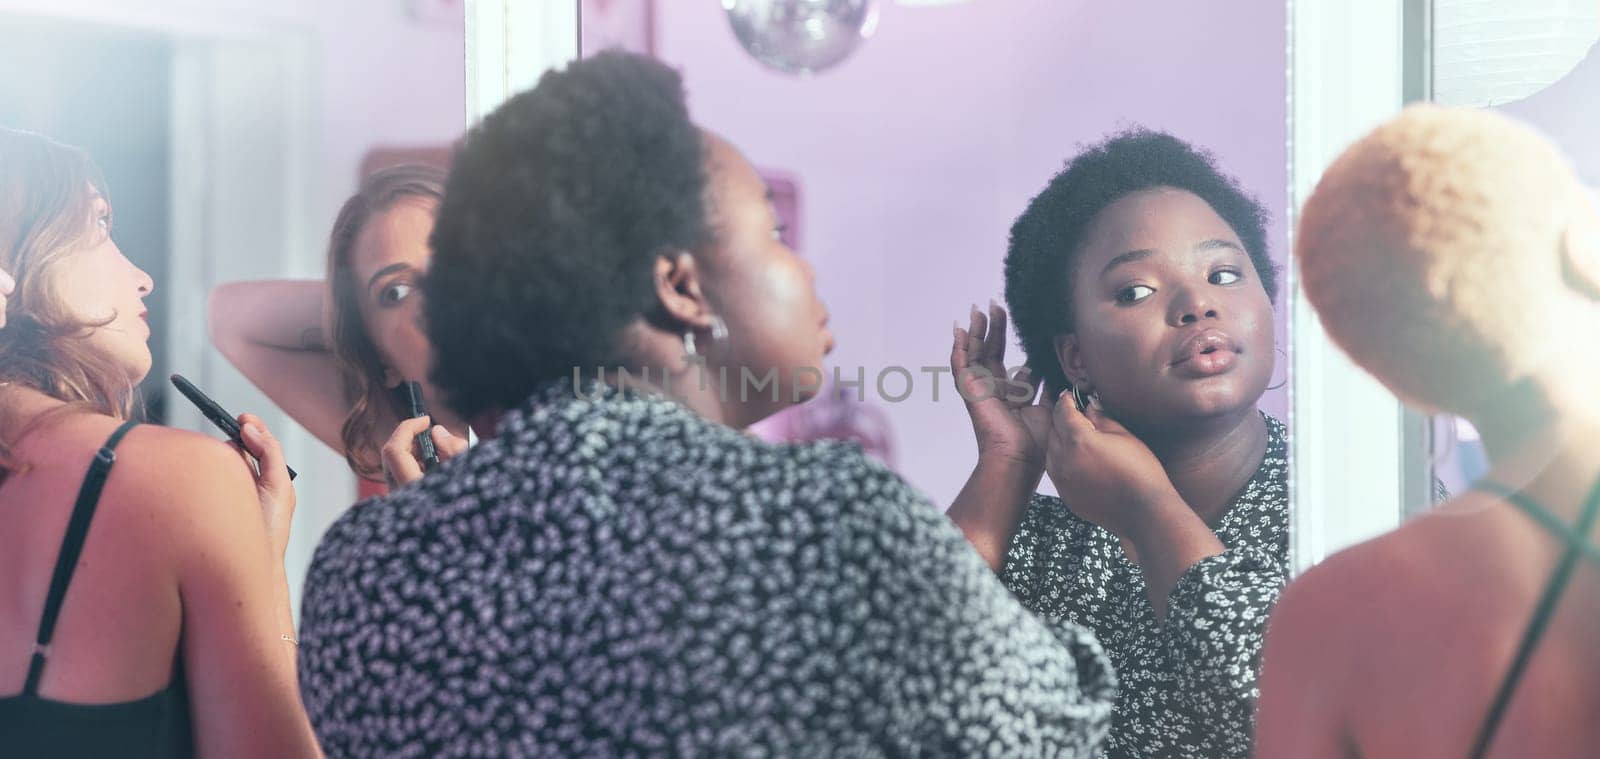 Black woman, night out and girls in bathroom, ready for party and evening out for dancing, bonding and fun. Ladies, females and friends fixing hair, makeup and outfit for club, beauty and happiness.